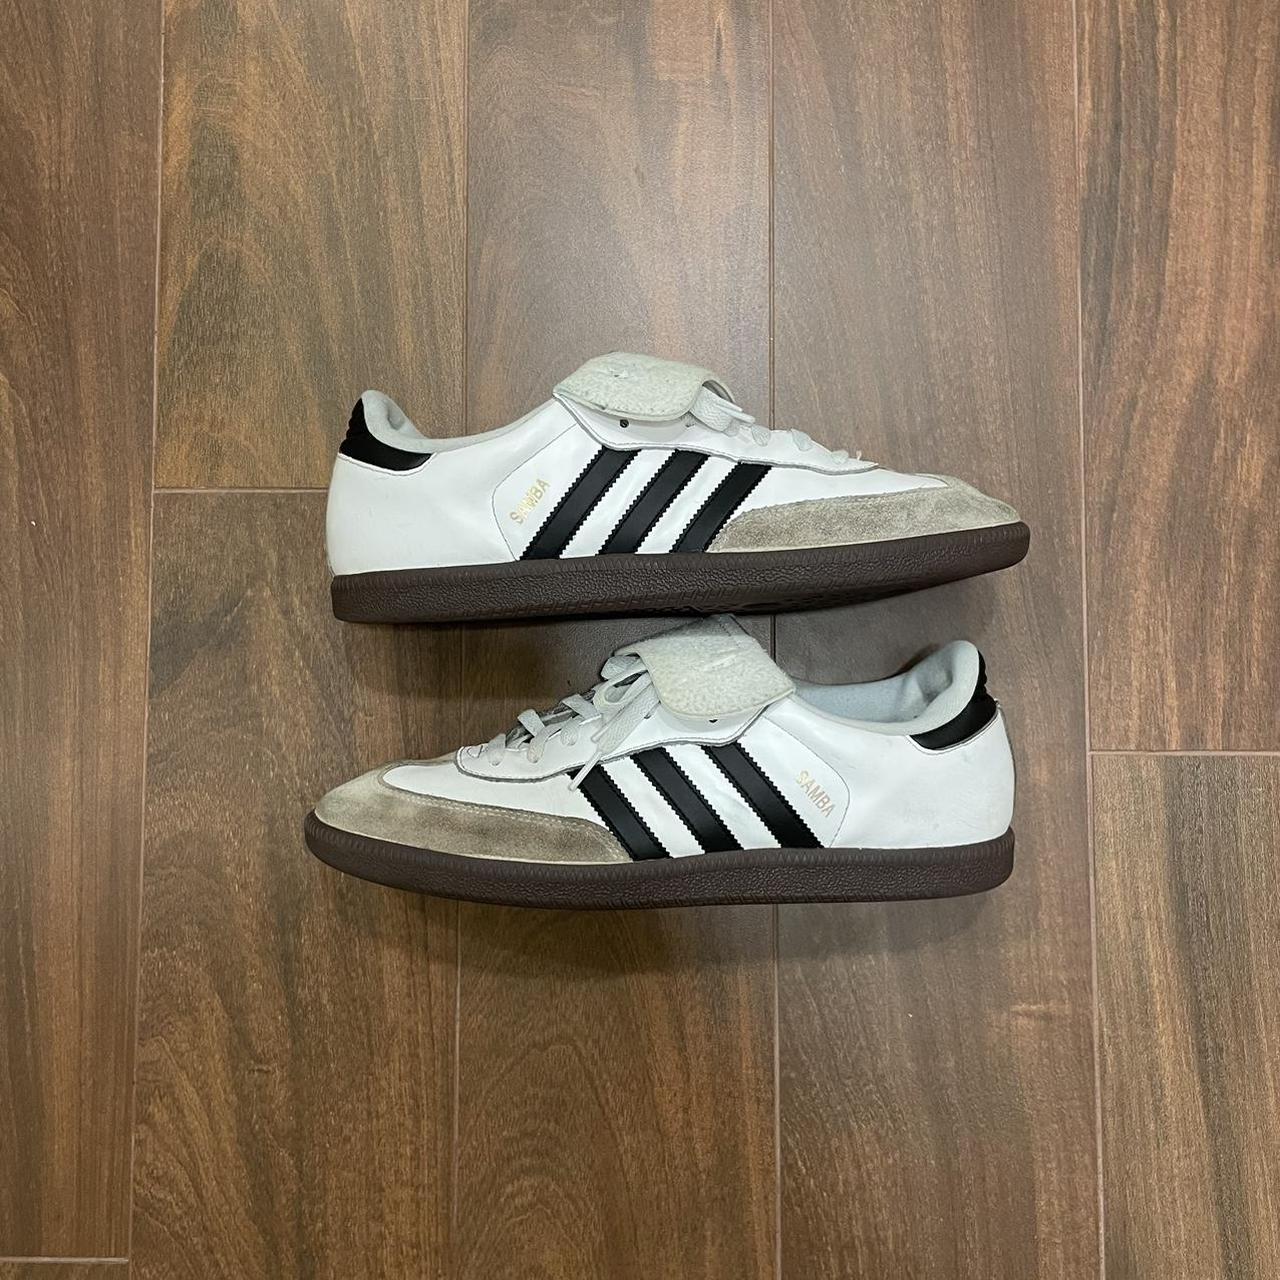 Adidas Men's White and Black Trainers | Depop